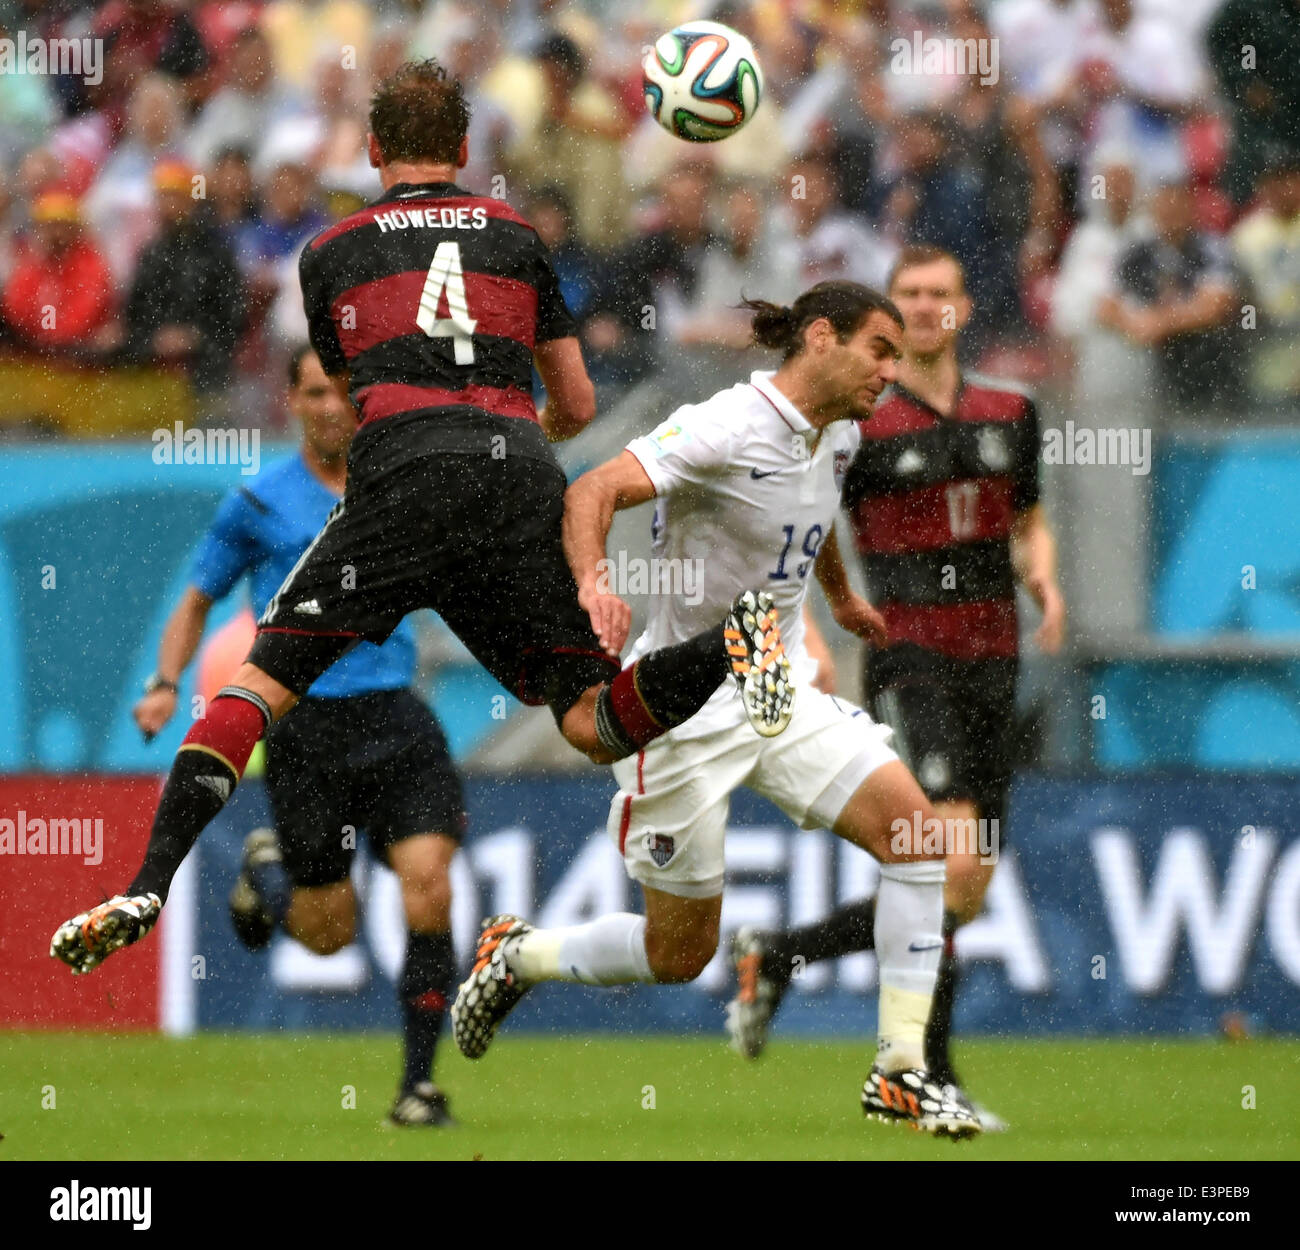 Recife, Brazil. 26th June, 2014. Germany's Benedikt Howedes (L, front) vies with Graham Zusi of the U.S. during a Group G match between the U.S. and Germany of 2014 FIFA World Cup at the Arena Pernambuco Stadium in Recife, Brazil, on June 26, 2014. Credit:  Guo Yong/Xinhua/Alamy Live News Stock Photo